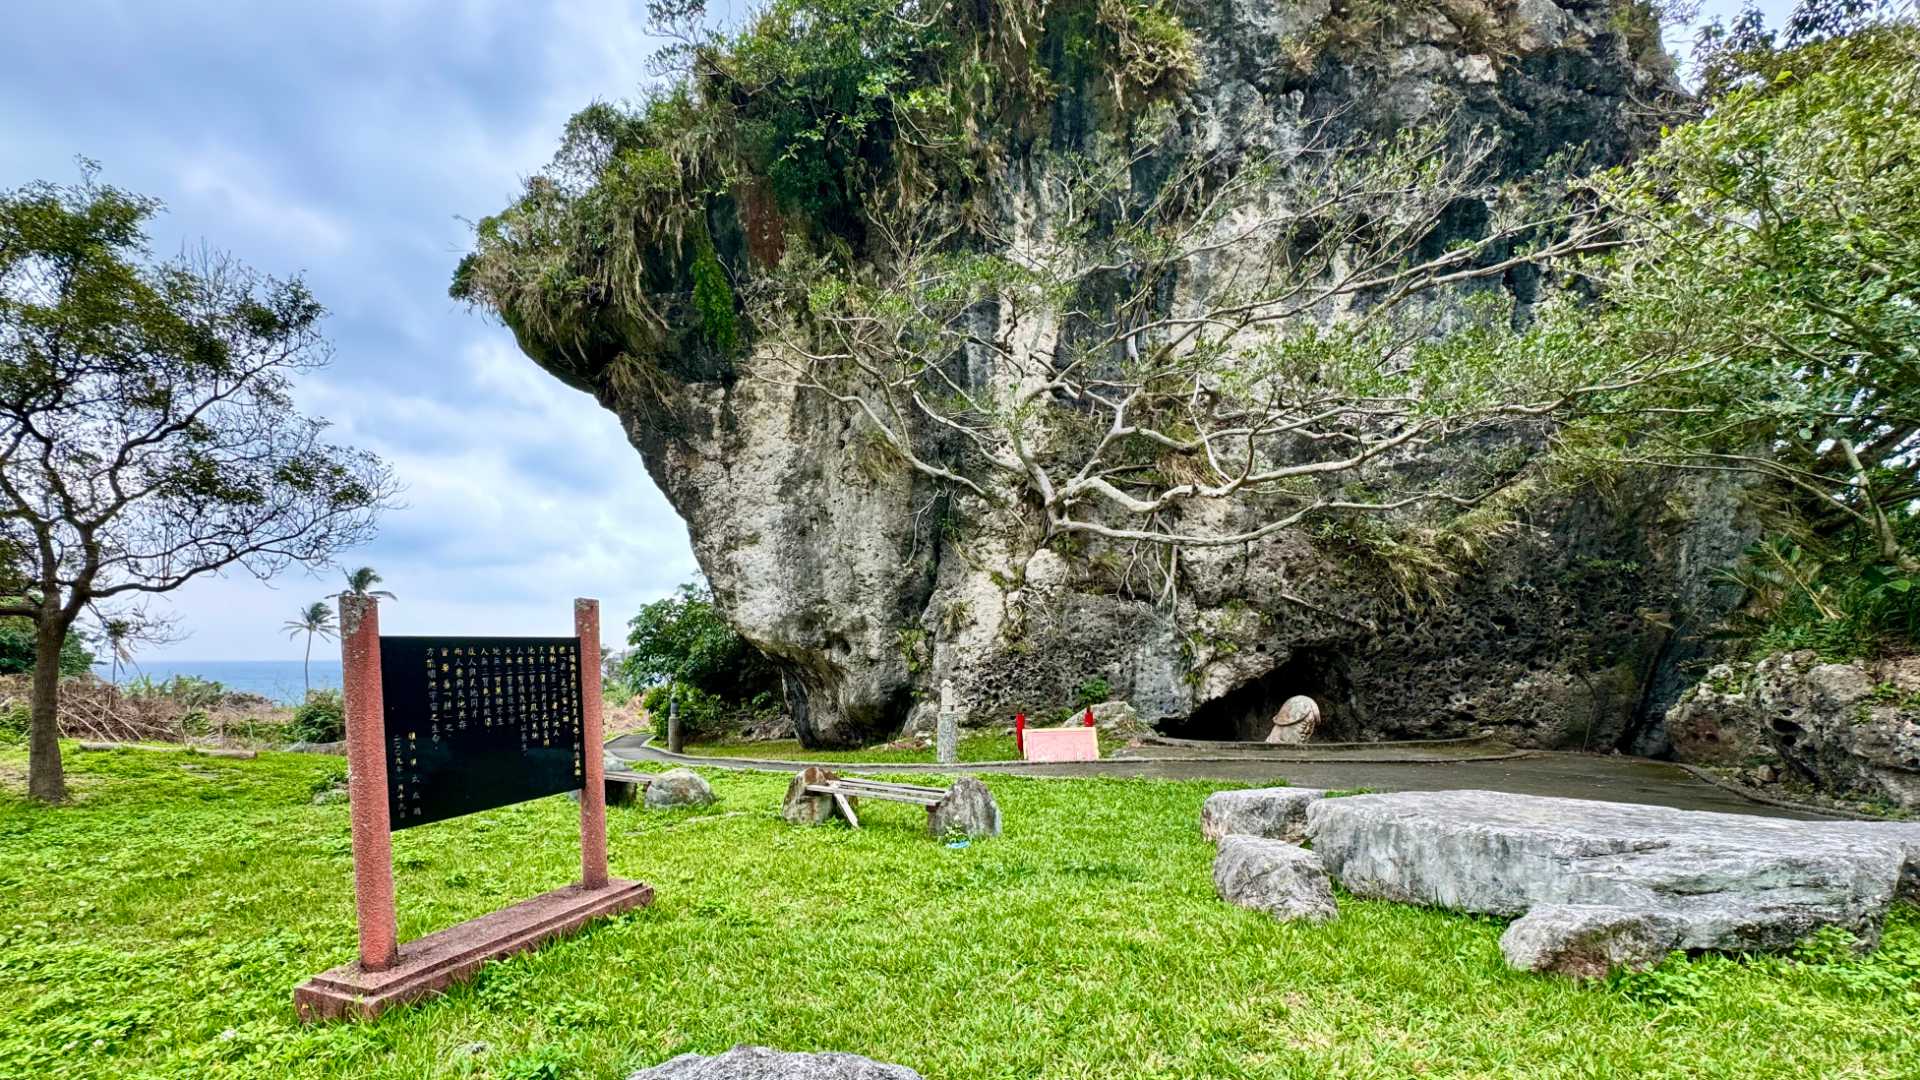 A grassy area with some wooden seating and a cave visible a few meters away. There is something poking out of the cave.